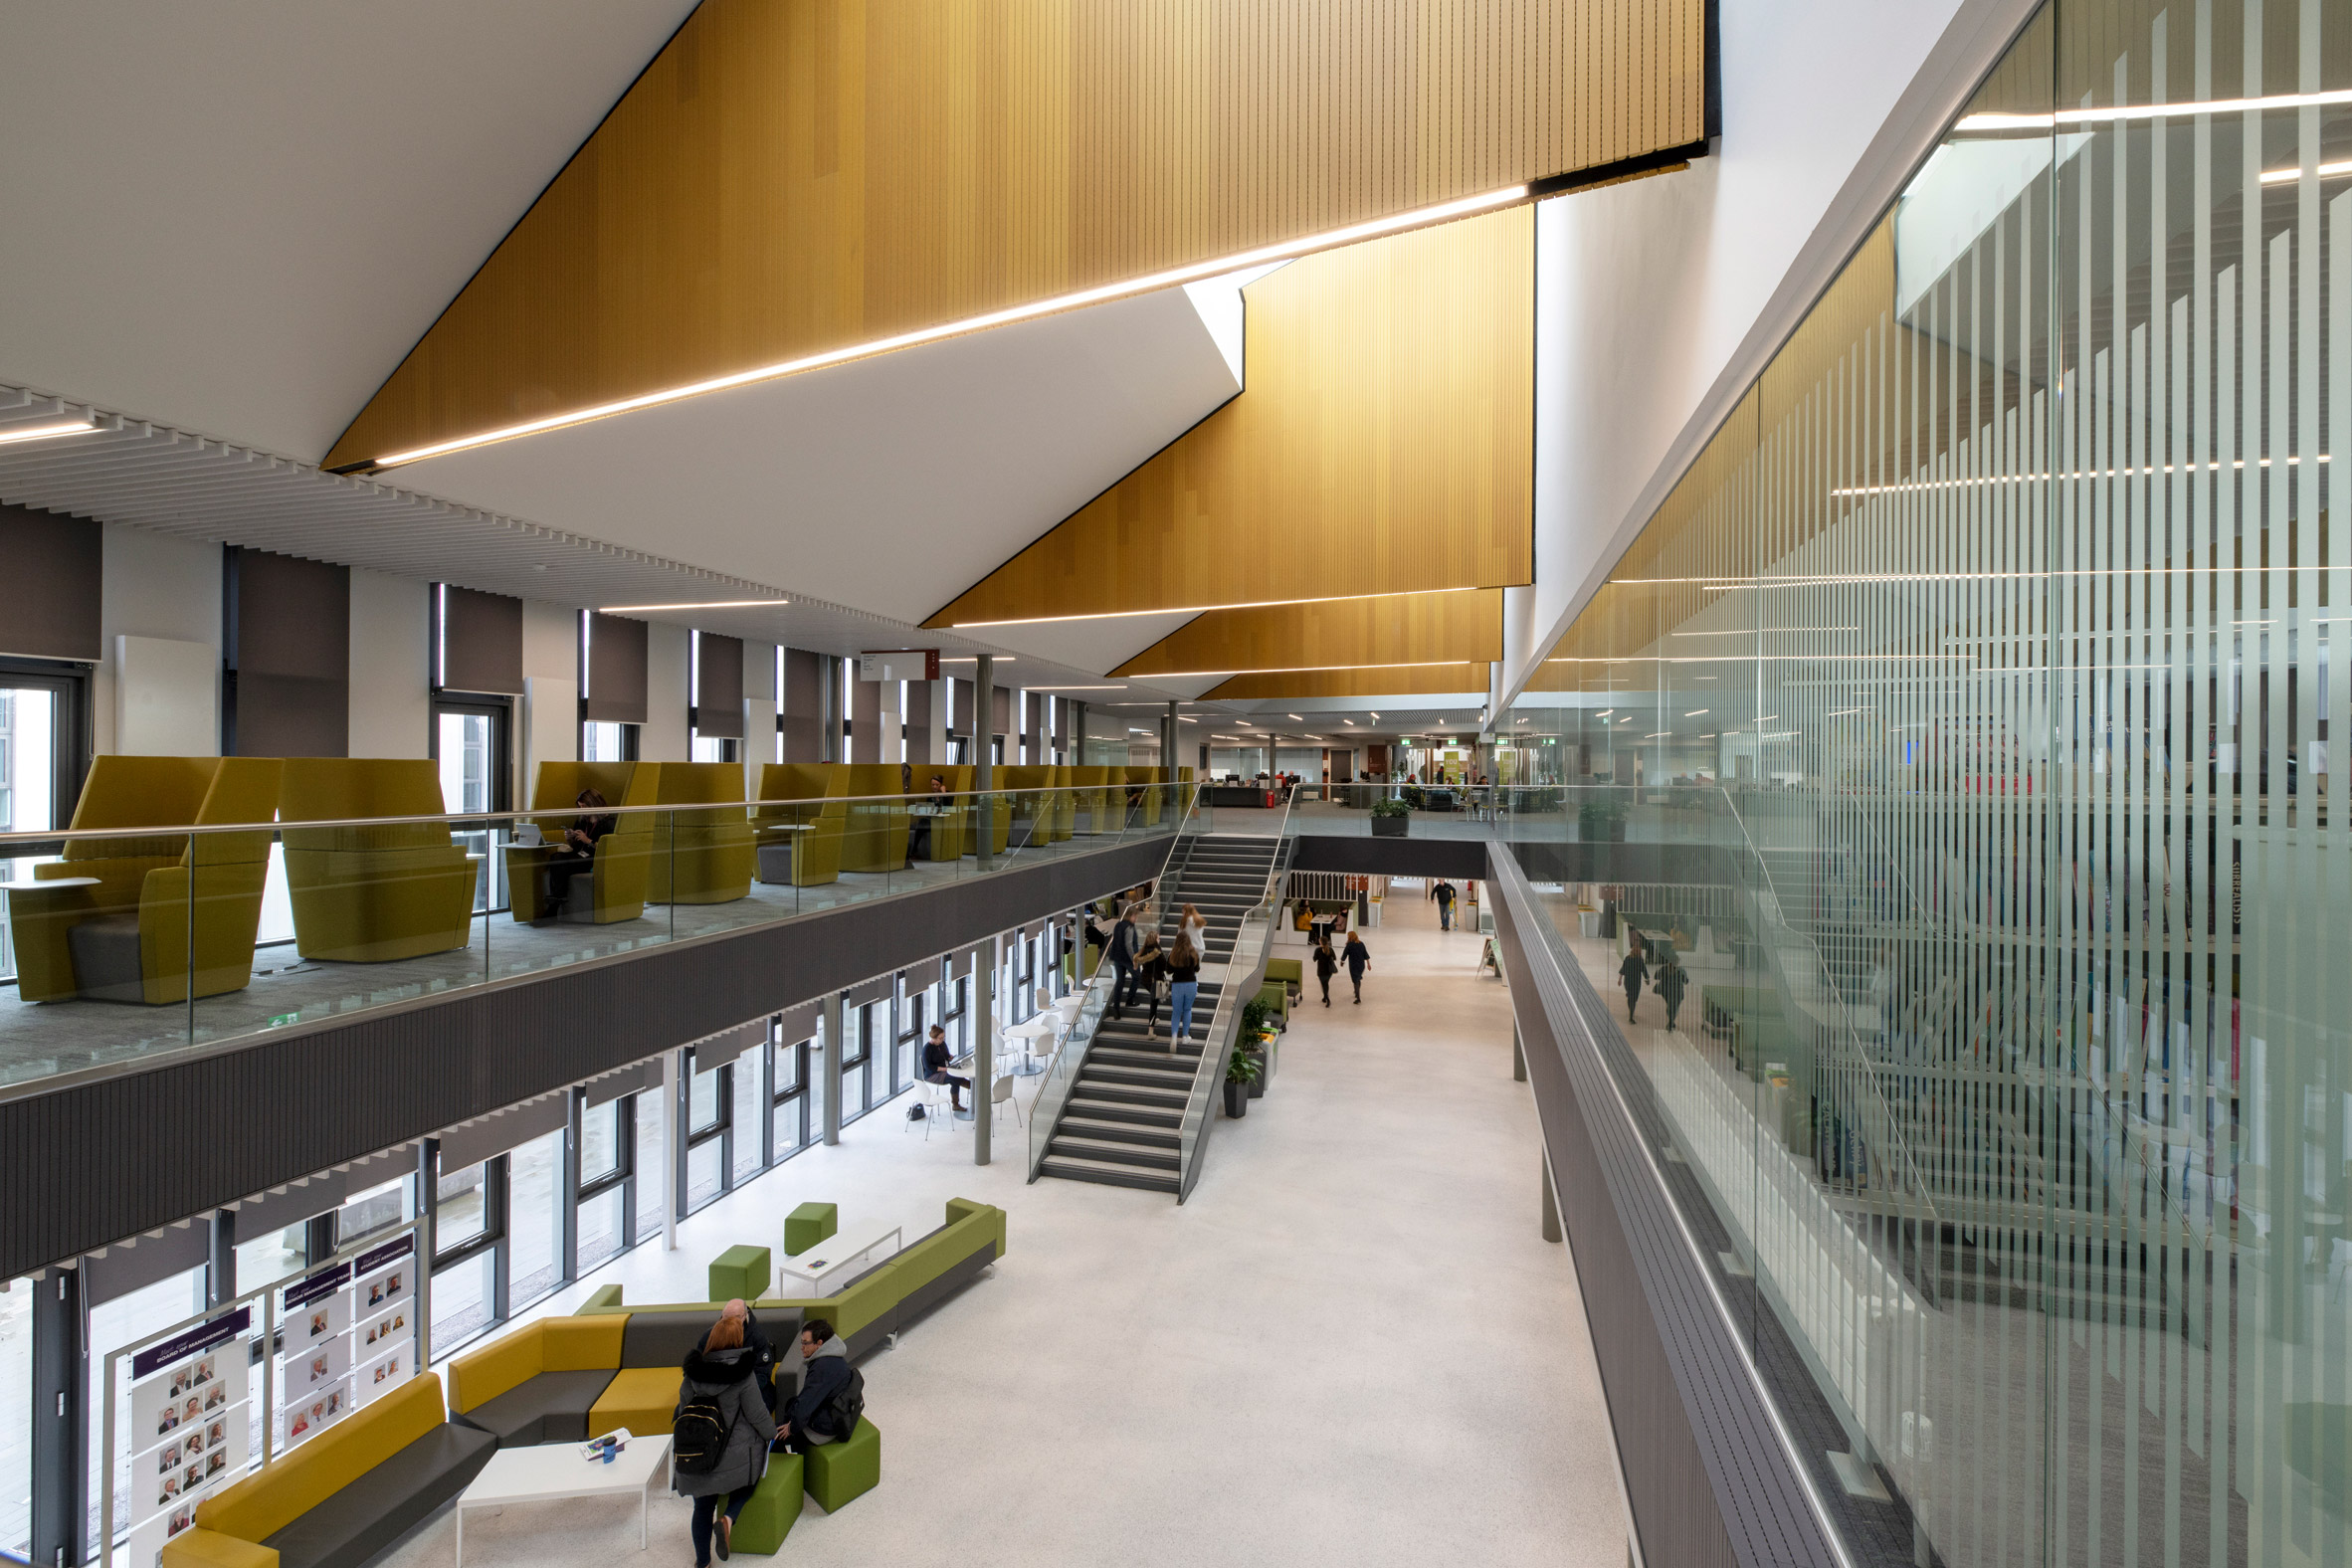 Interior of Forth Valley College in Falkirk